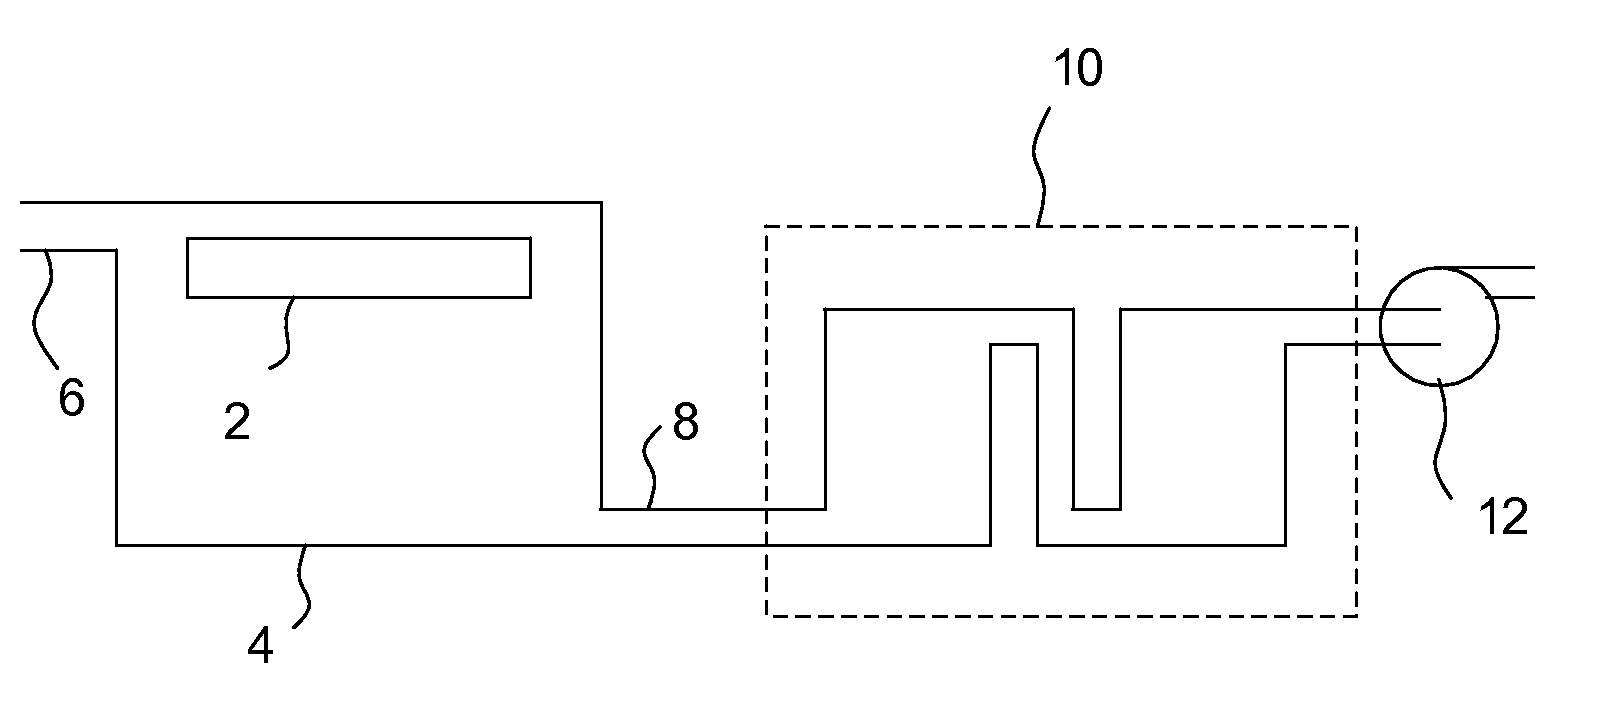 METHOD FOR REMOVING VOLATILE ORGANIC COMPOUNDS (VOCs) FROM AN AIR STREAM